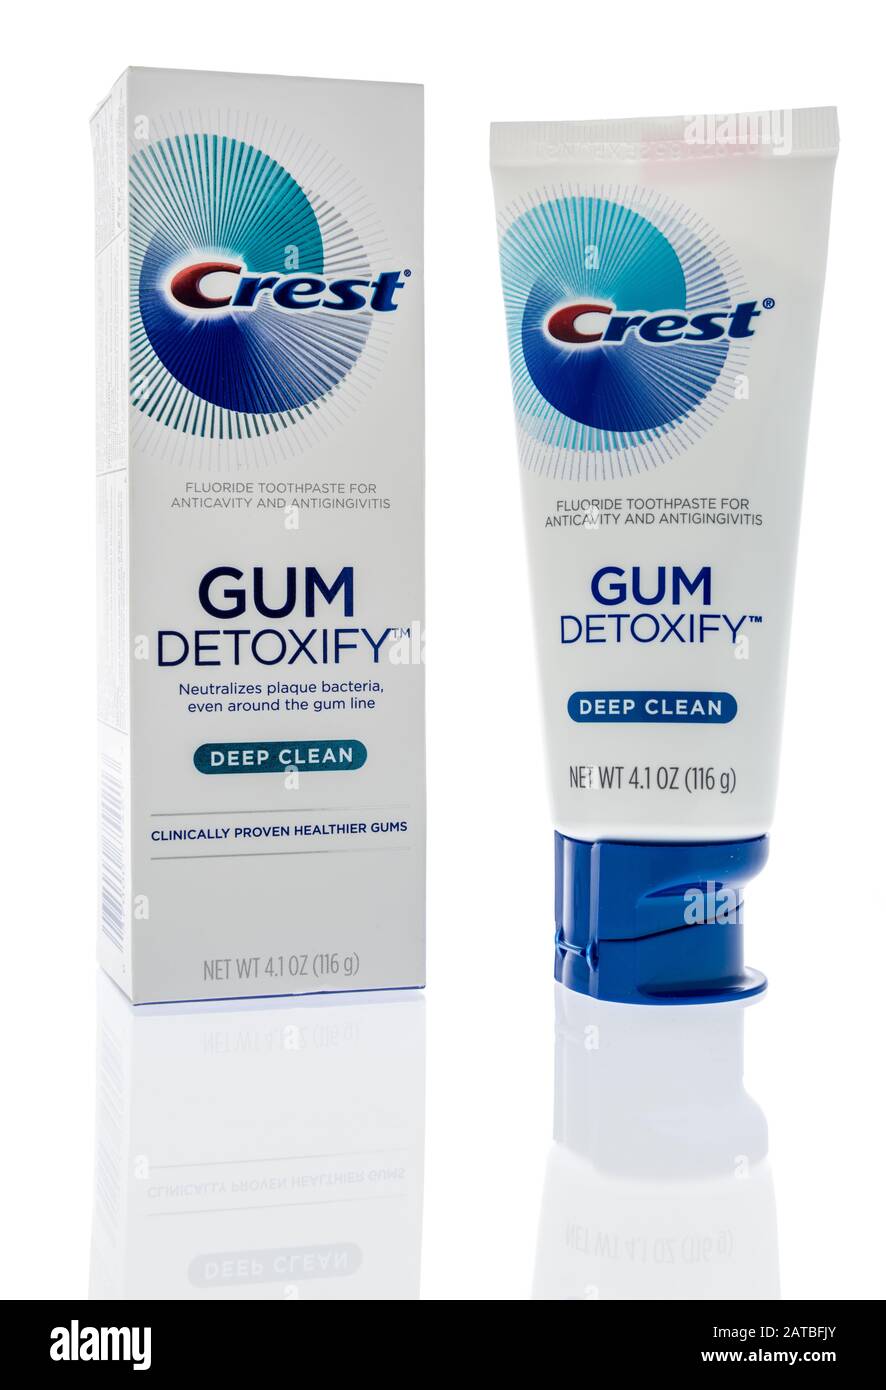 Winneconne, WI - 19 January 2019 : A package of Crest gum detoxify deep clean toothpaste on an isolated background Stock Photo